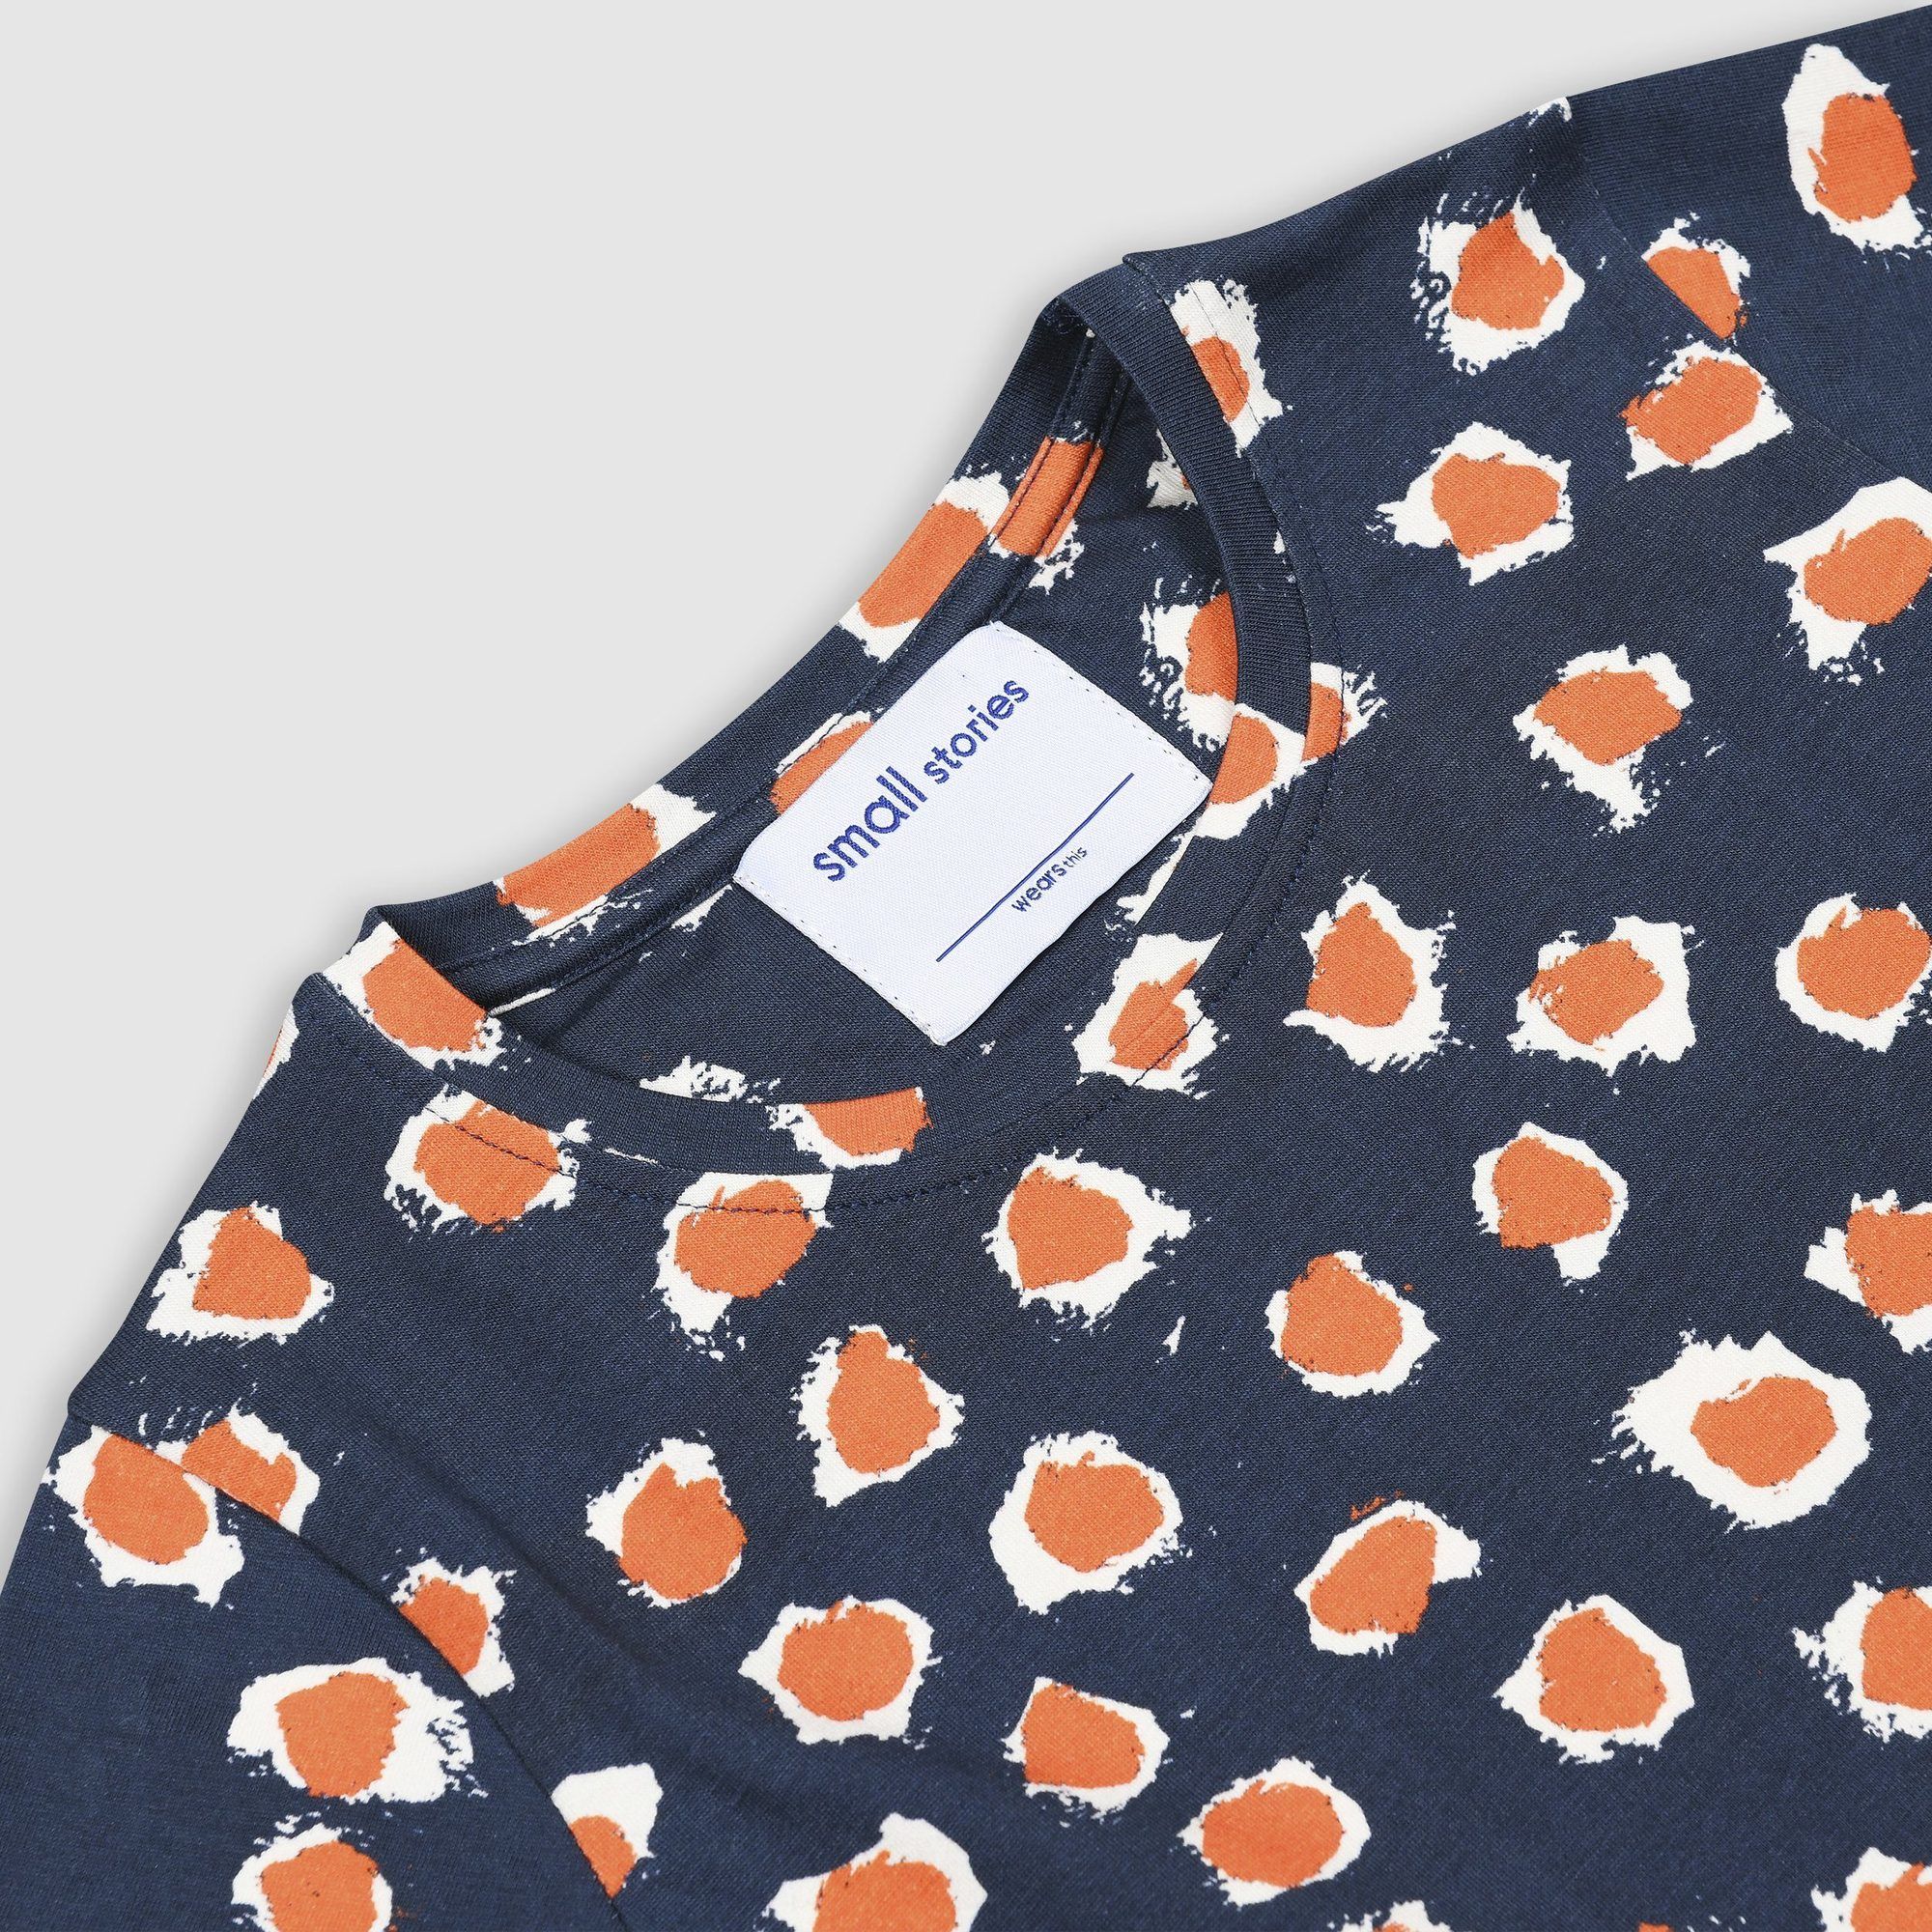 Short sleeve jersey dress with drop waist in our bespoke painted dot print in blue with orange and white dots. Made from super soft stretchy cotton.